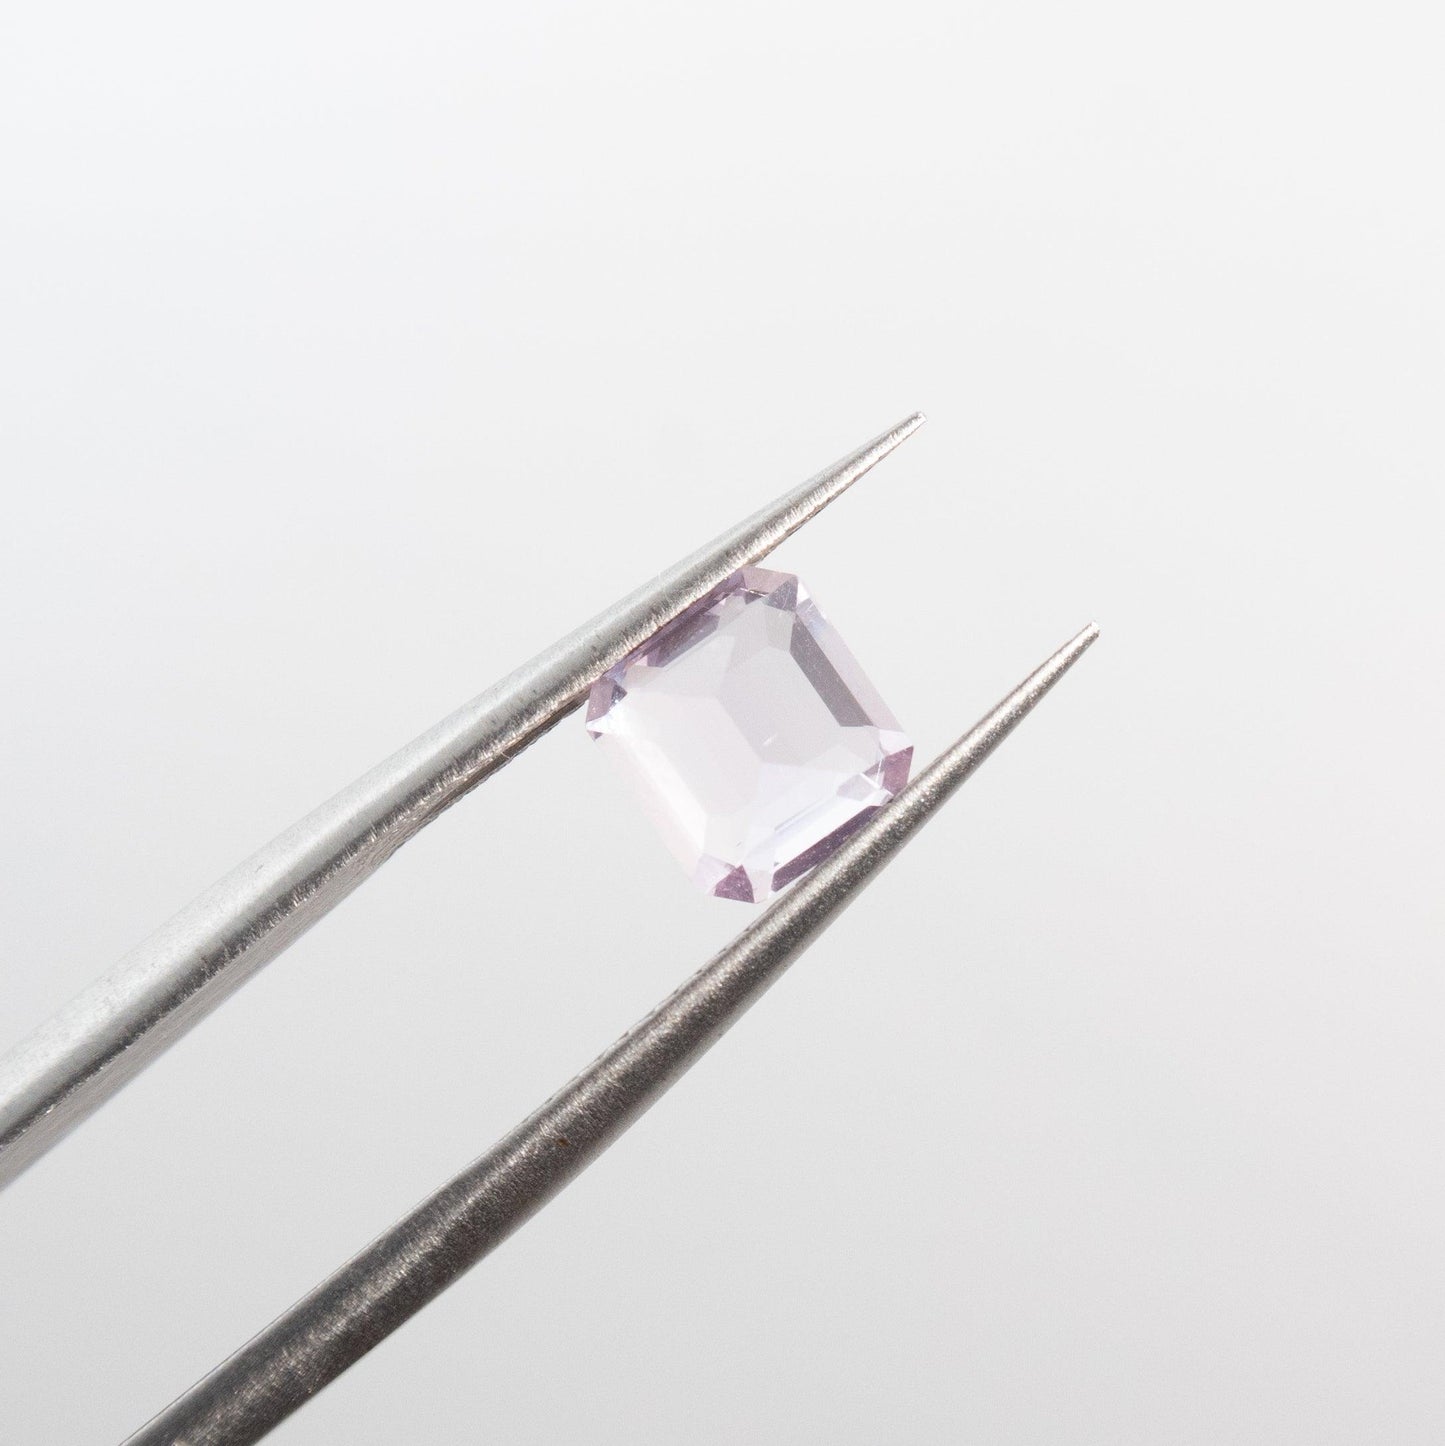 Peach/Baby Pink Sapphire Natural No Heat 1.15ct - The Colored Stone Co.